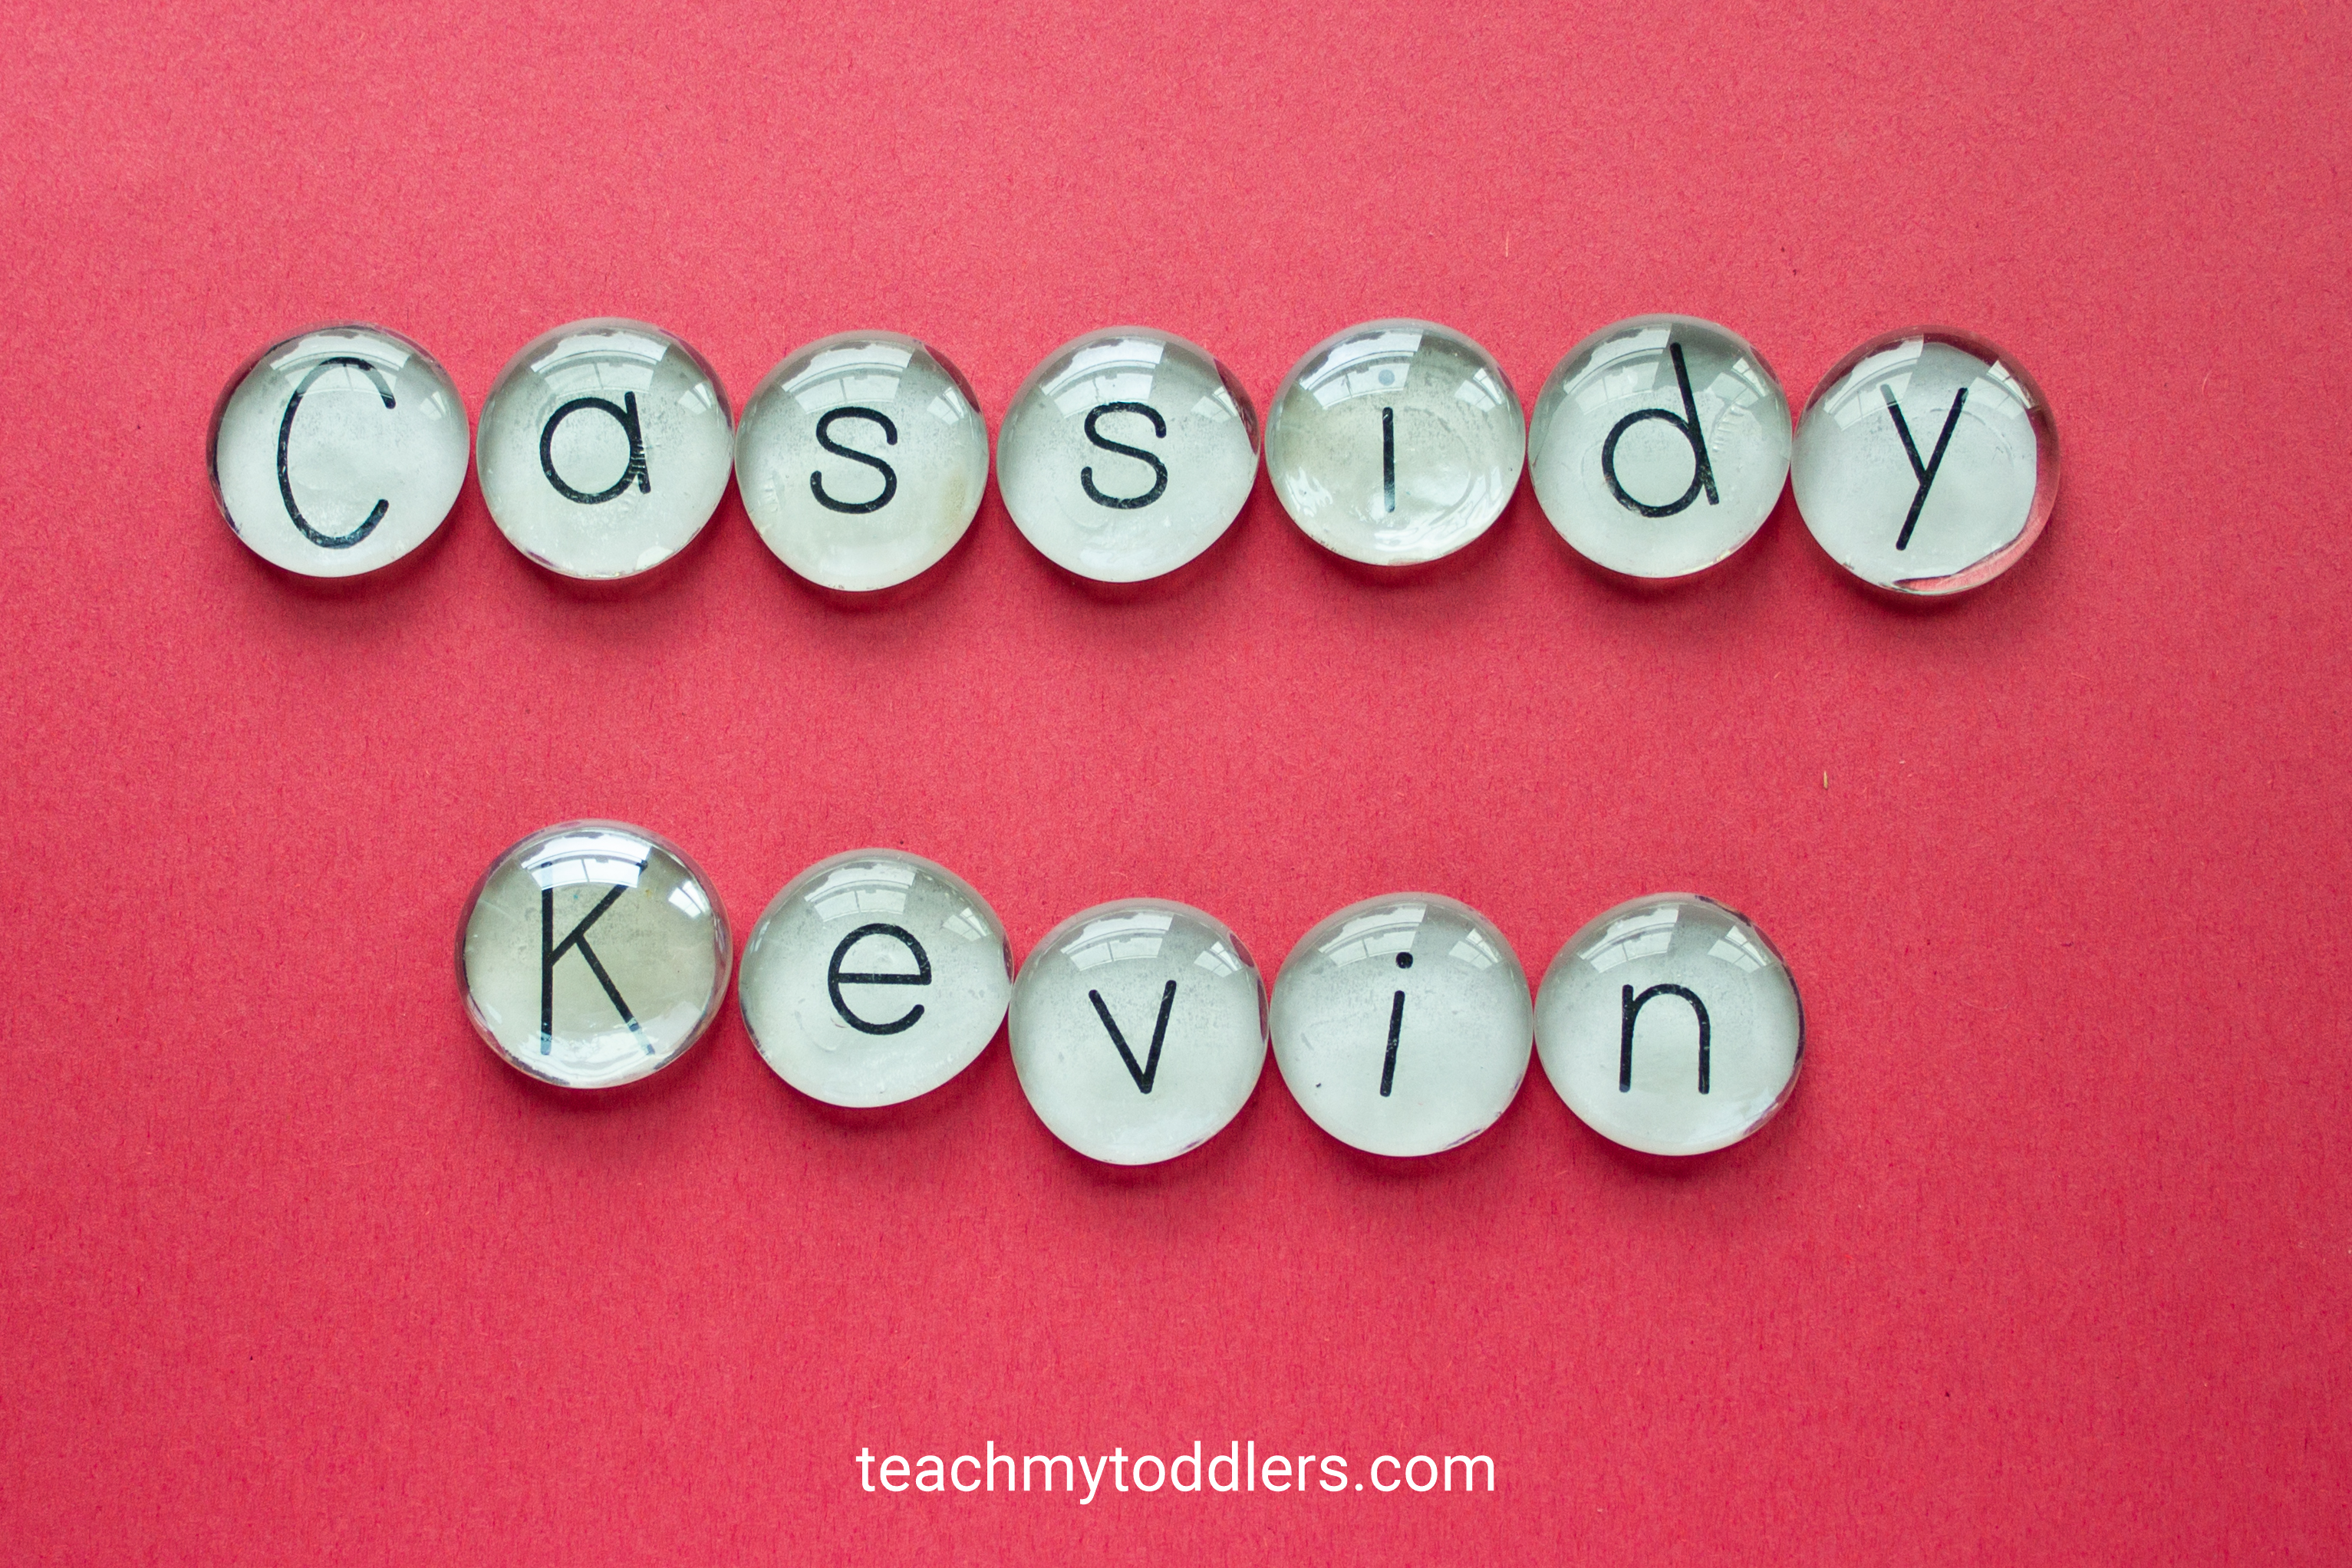 These flat marble letters are a fun way to teach your toddlers the alphabet